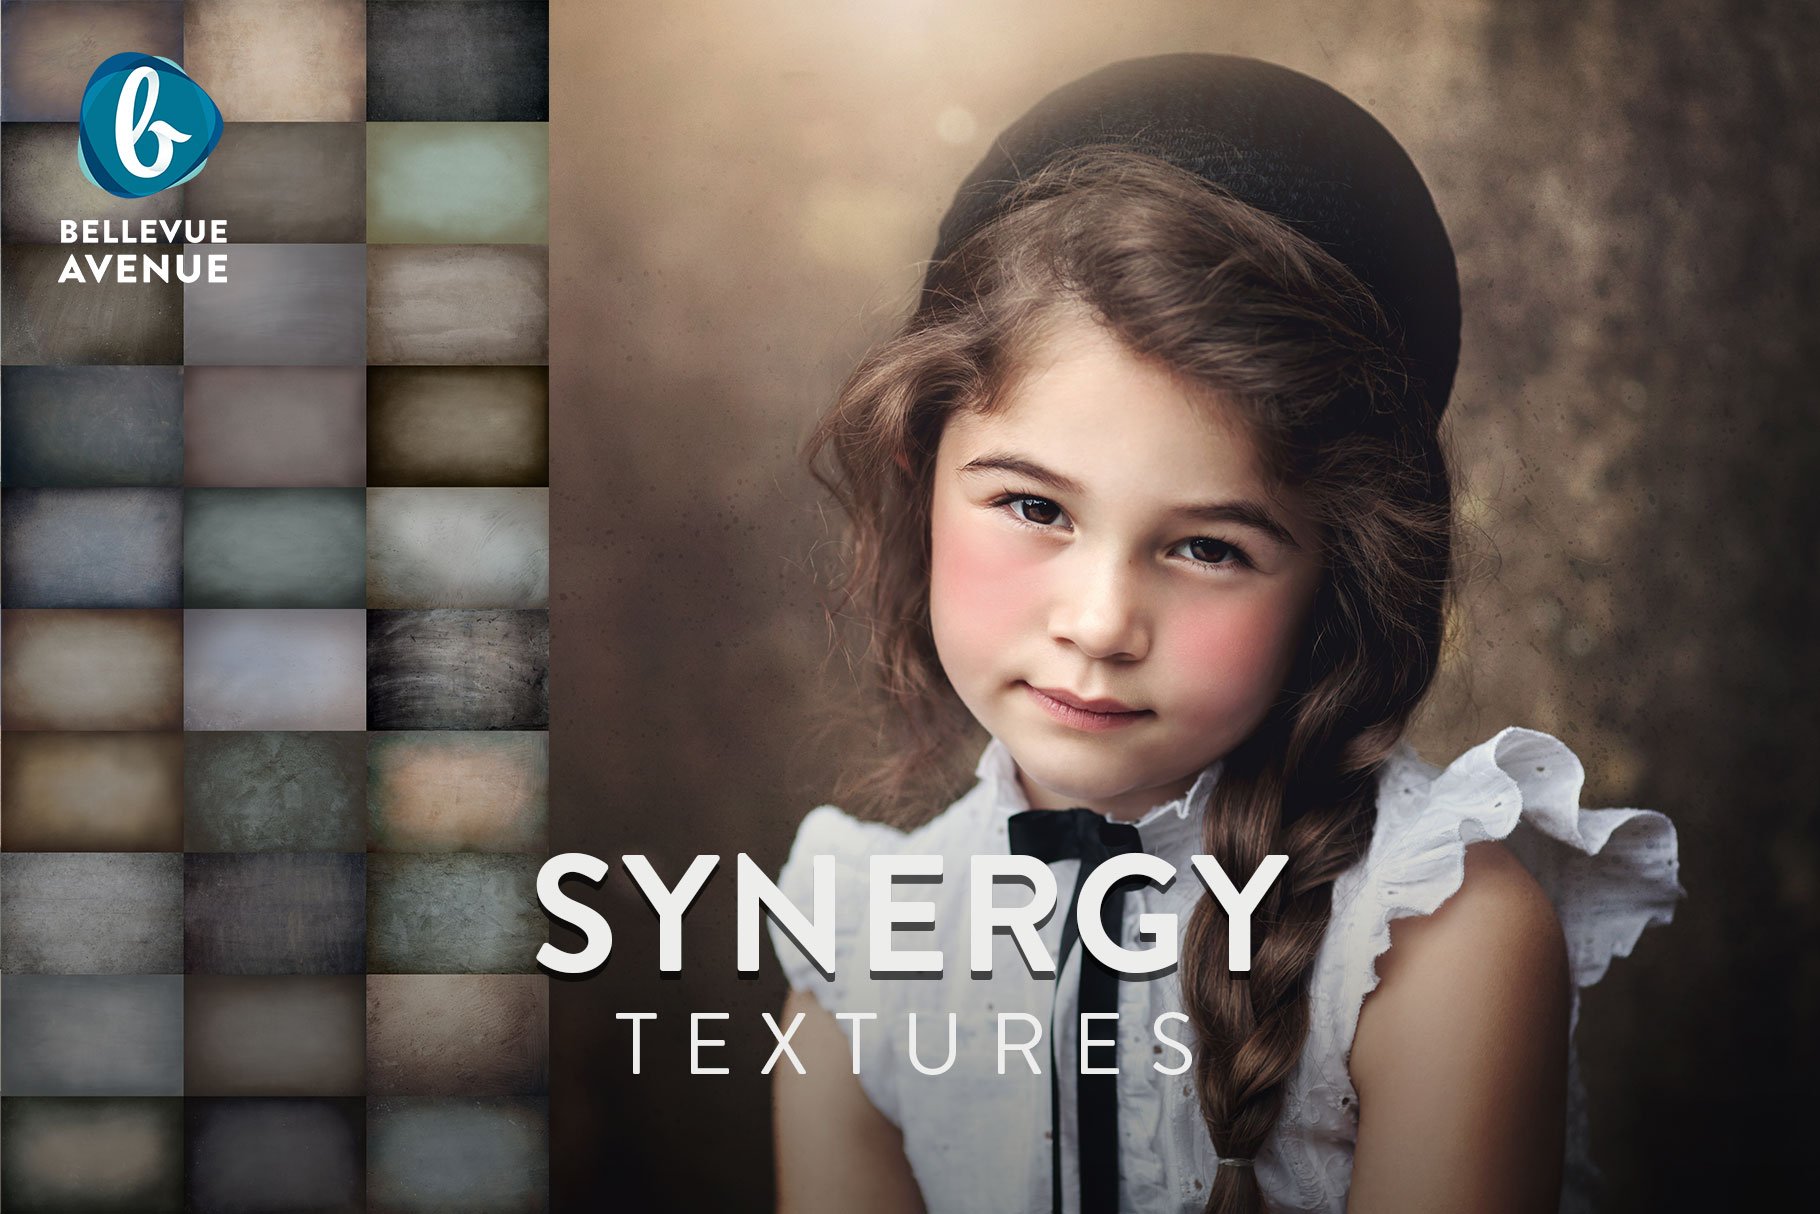 Synergy Texturescover image.